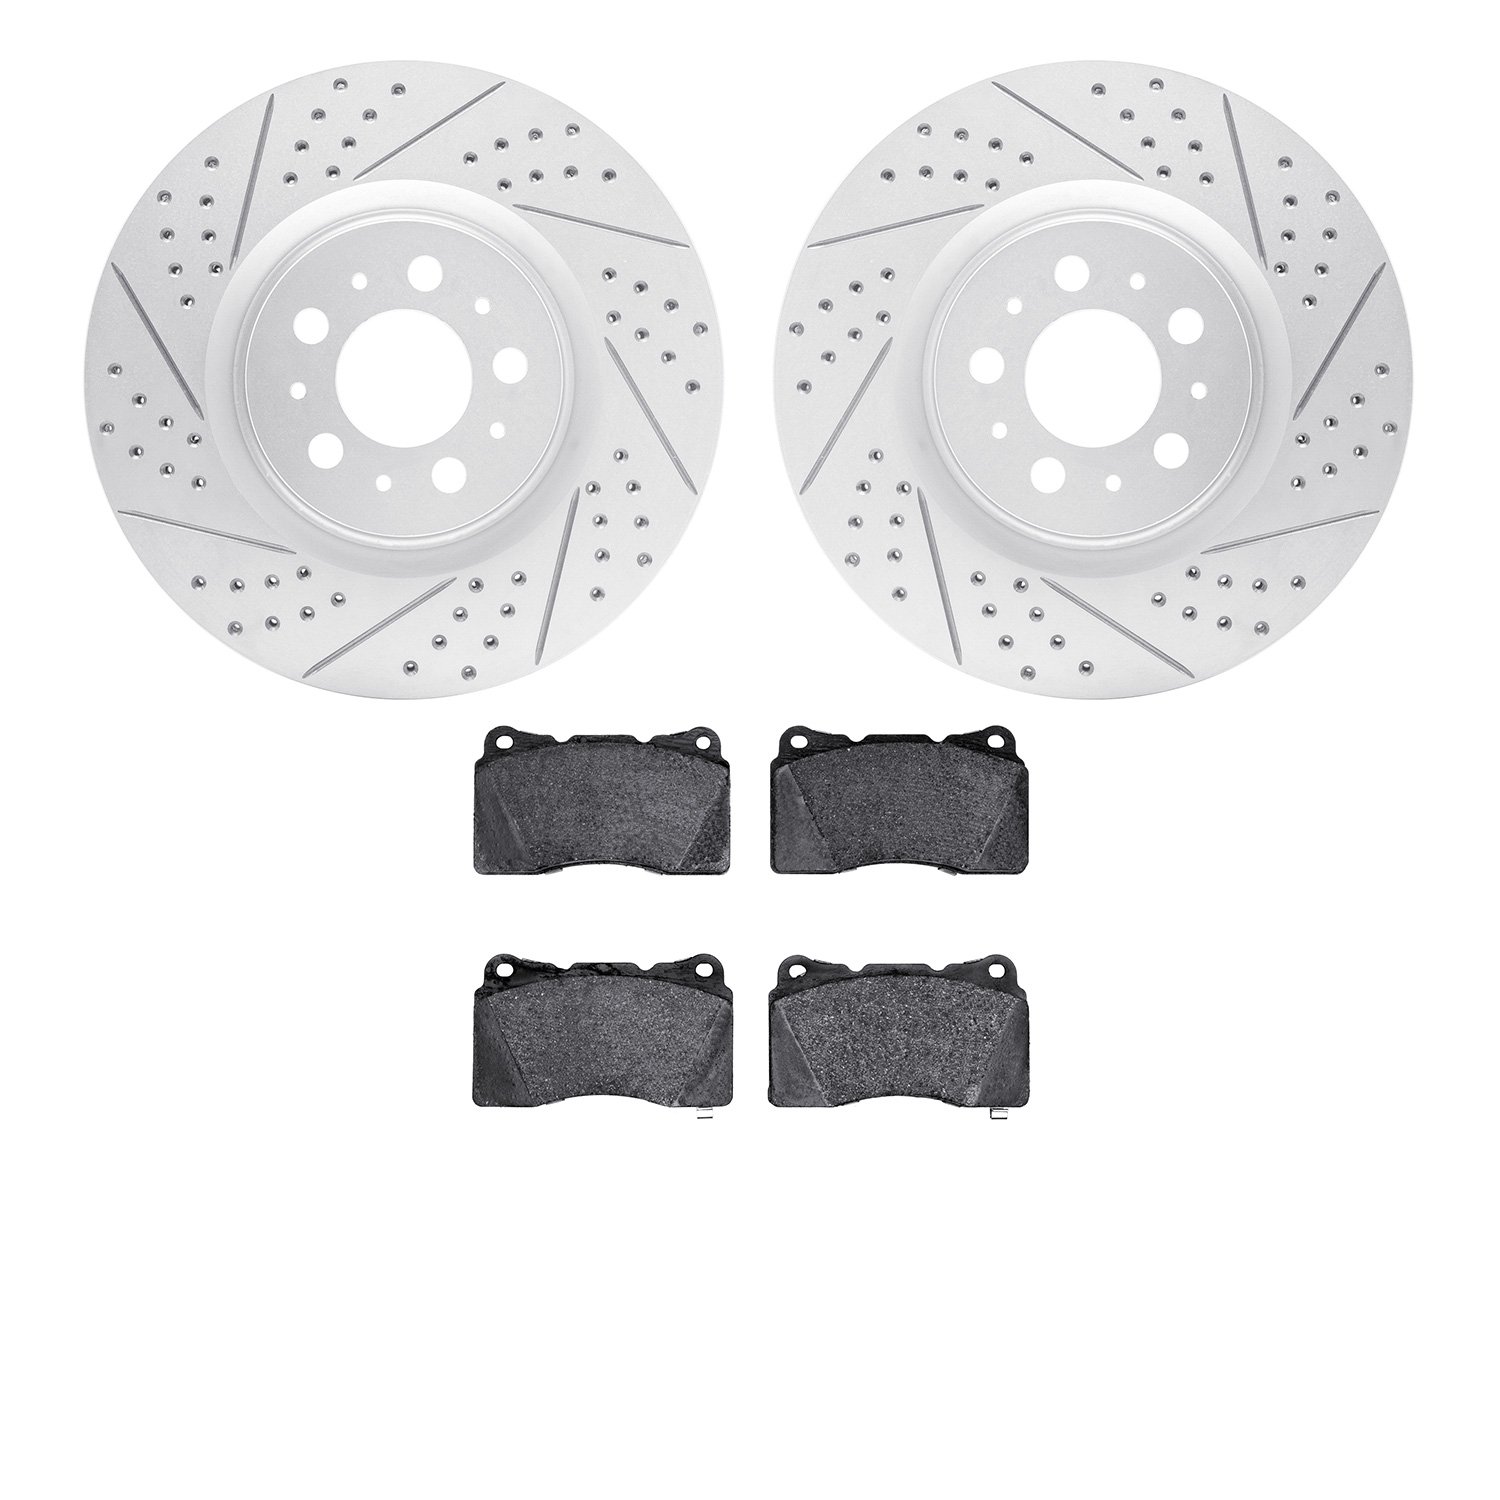 2502-27017 Geoperformance Drilled/Slotted Rotors w/5000 Advanced Brake Pads Kit, 2004-2007 Volvo, Position: Front